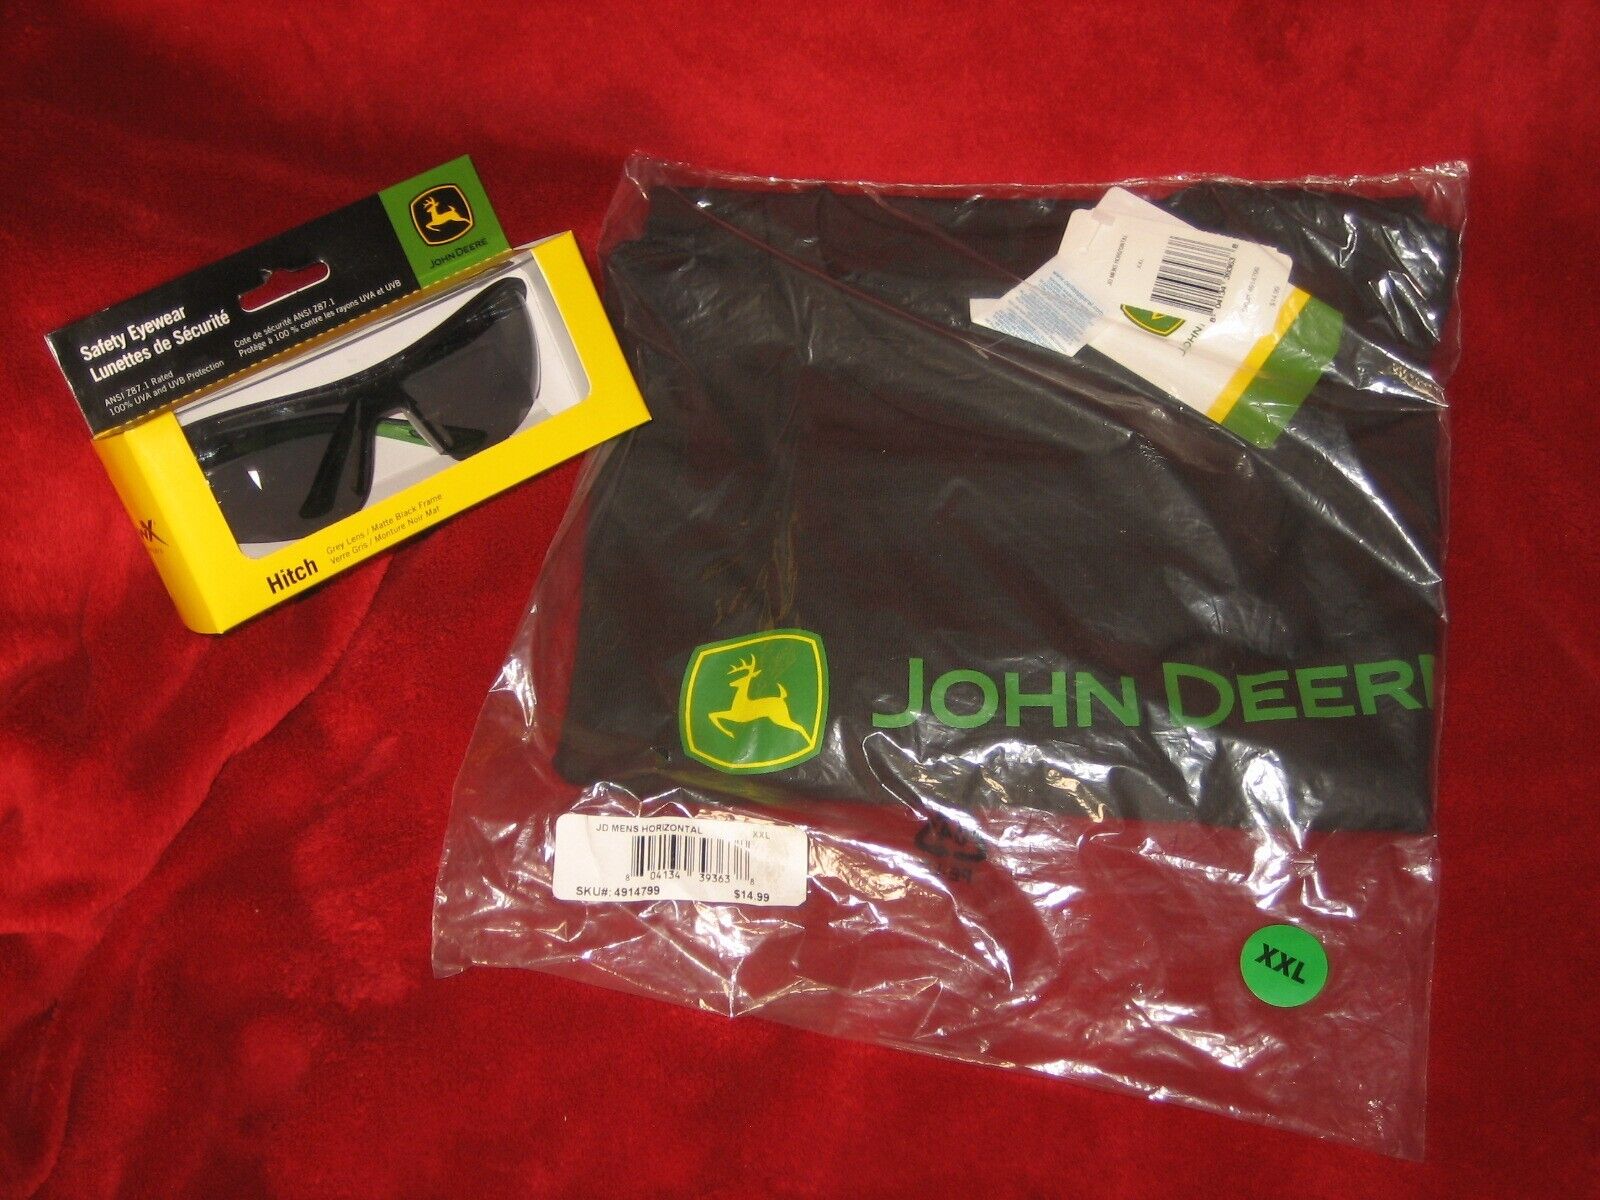 BRAND NEW JOHN DEERE T-SHIRT XXL & WILEY X TINTED SAFETY GLASSES NEW IN BOX! Без бренда